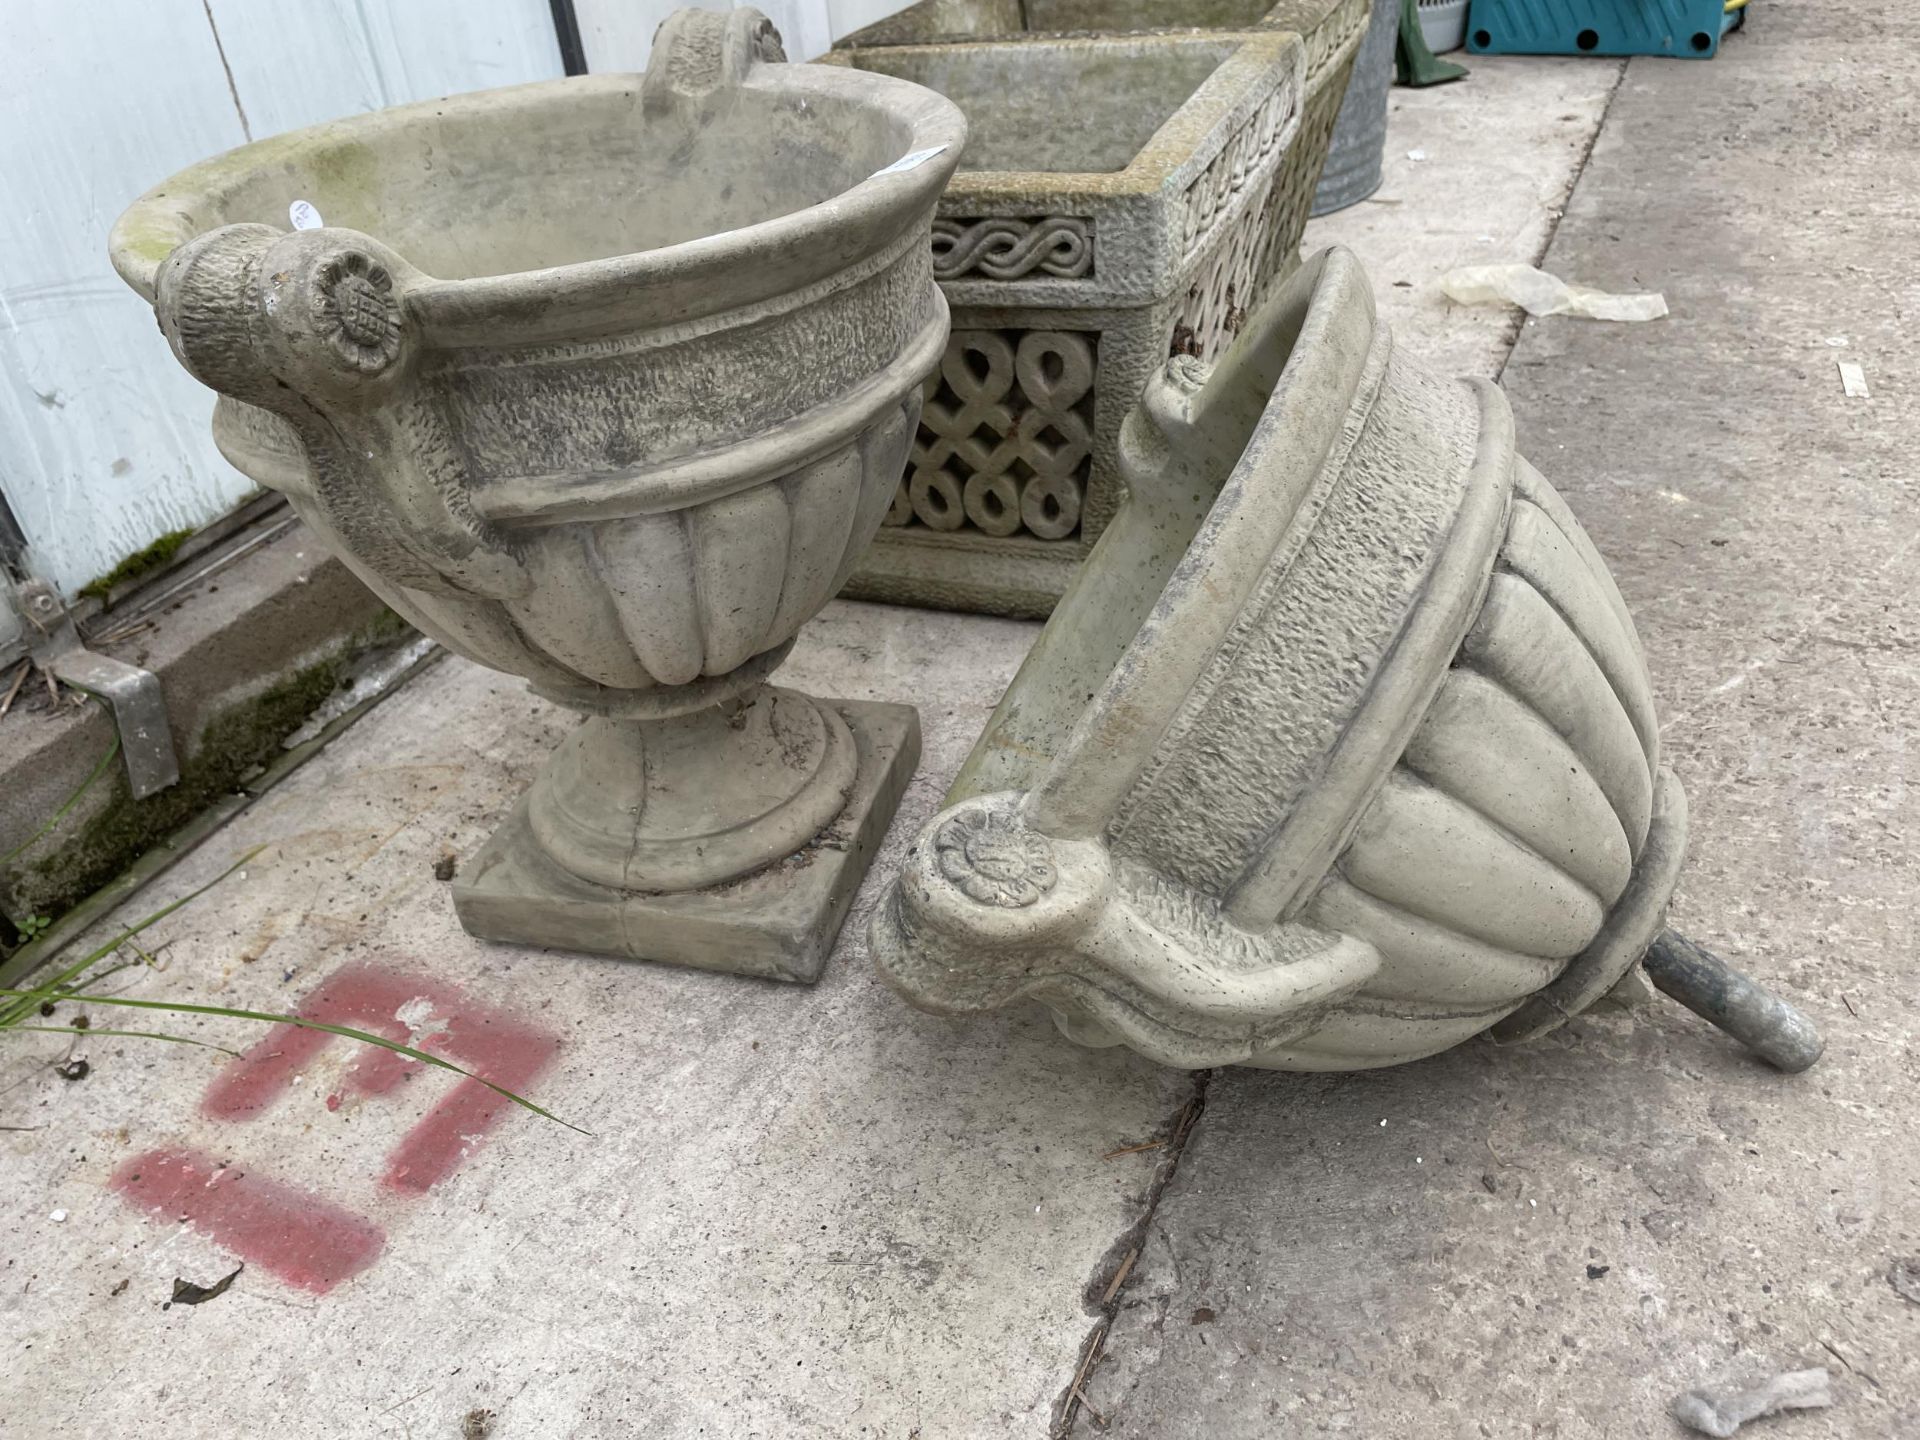 A CONCRETE GARDEN URN PLANTER WITH BASE AND A FURTHER URN PLANTER LACKING THE BASE